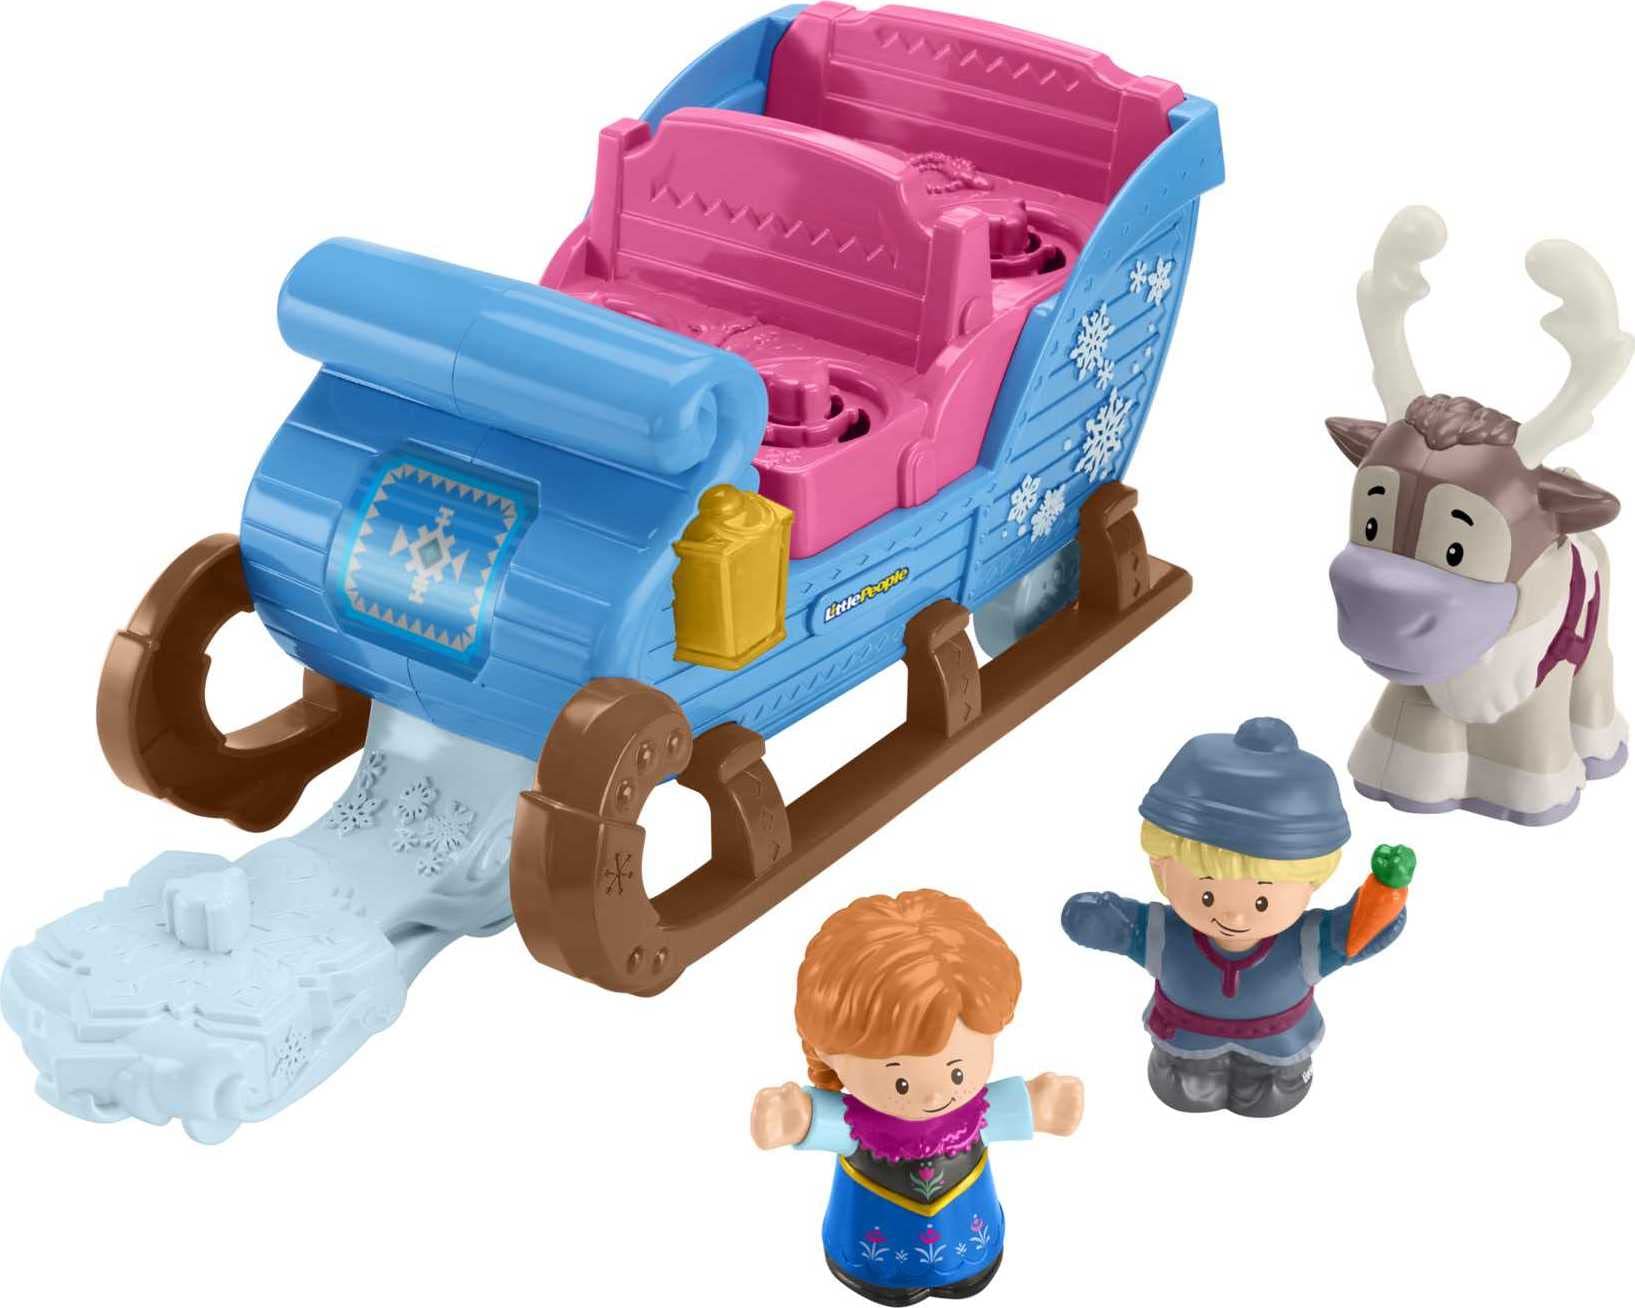 Fisher-Price Disney GGV30 Frozen Kristoff's Sleigh by Little People, Multi Color